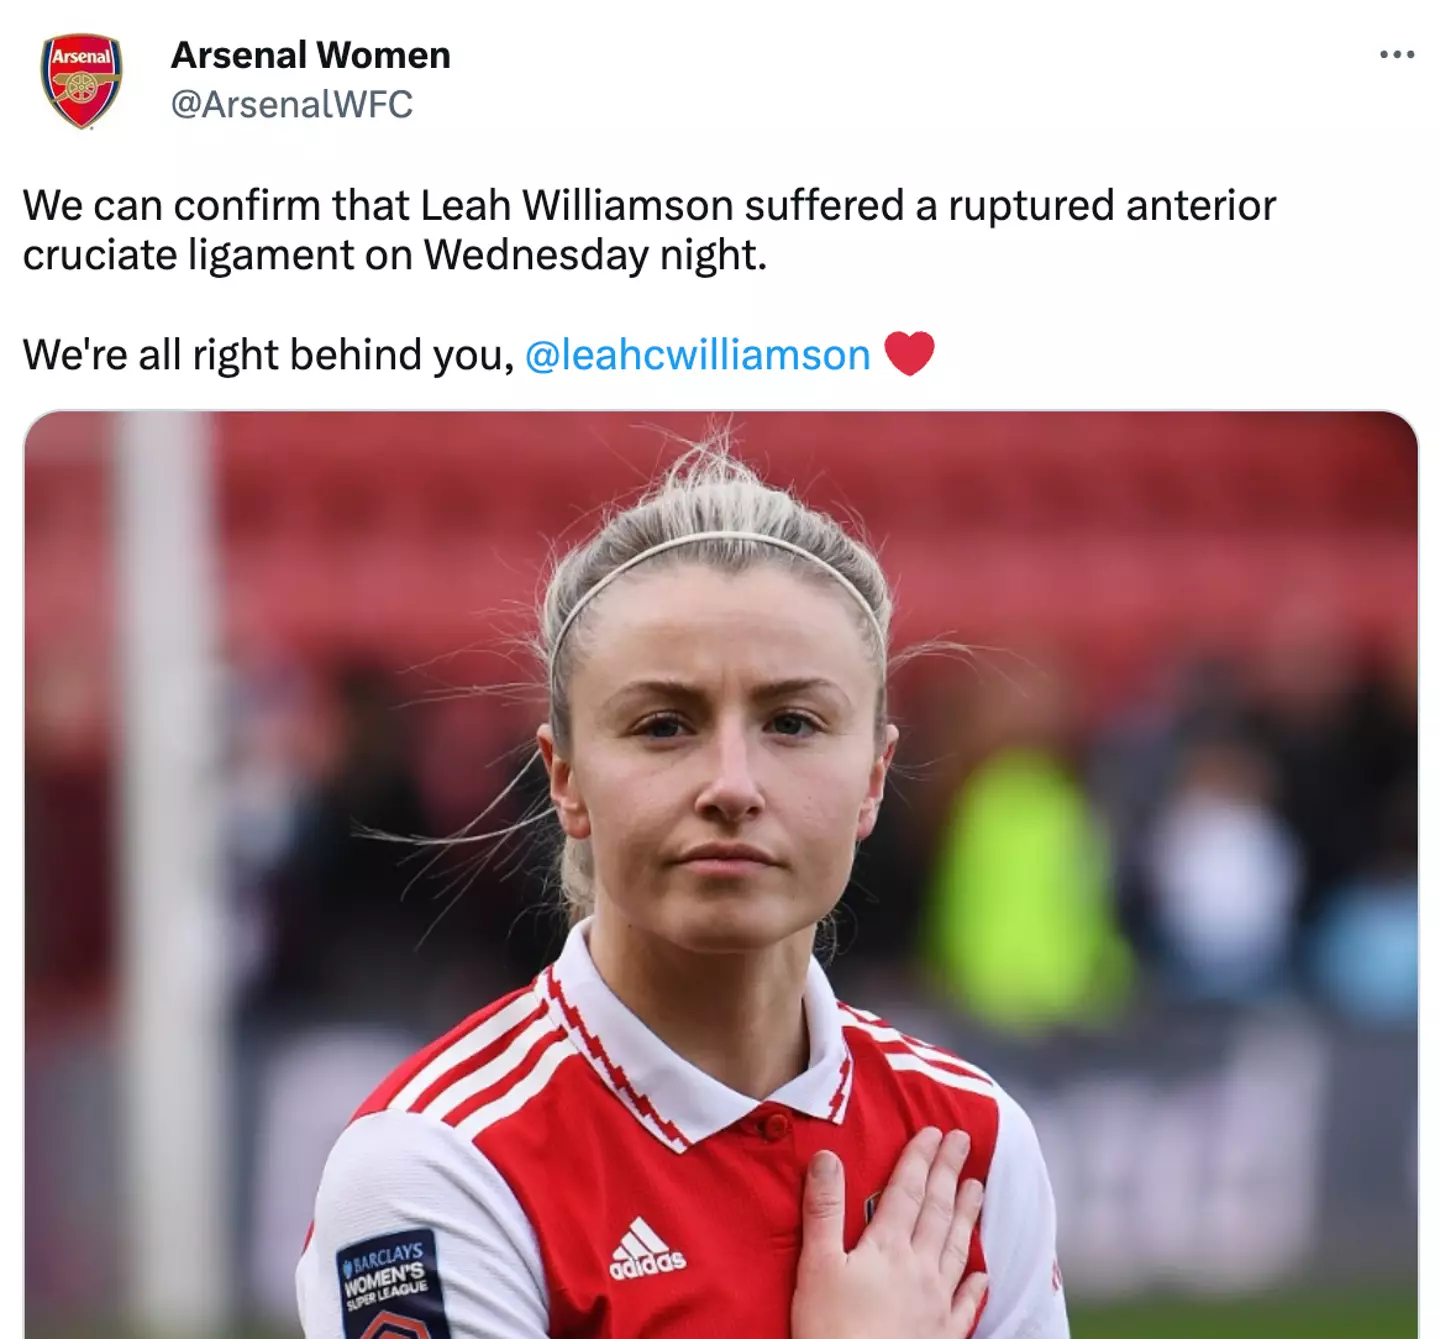 Arsenal confirmed the news of Leah Williamson's injury.